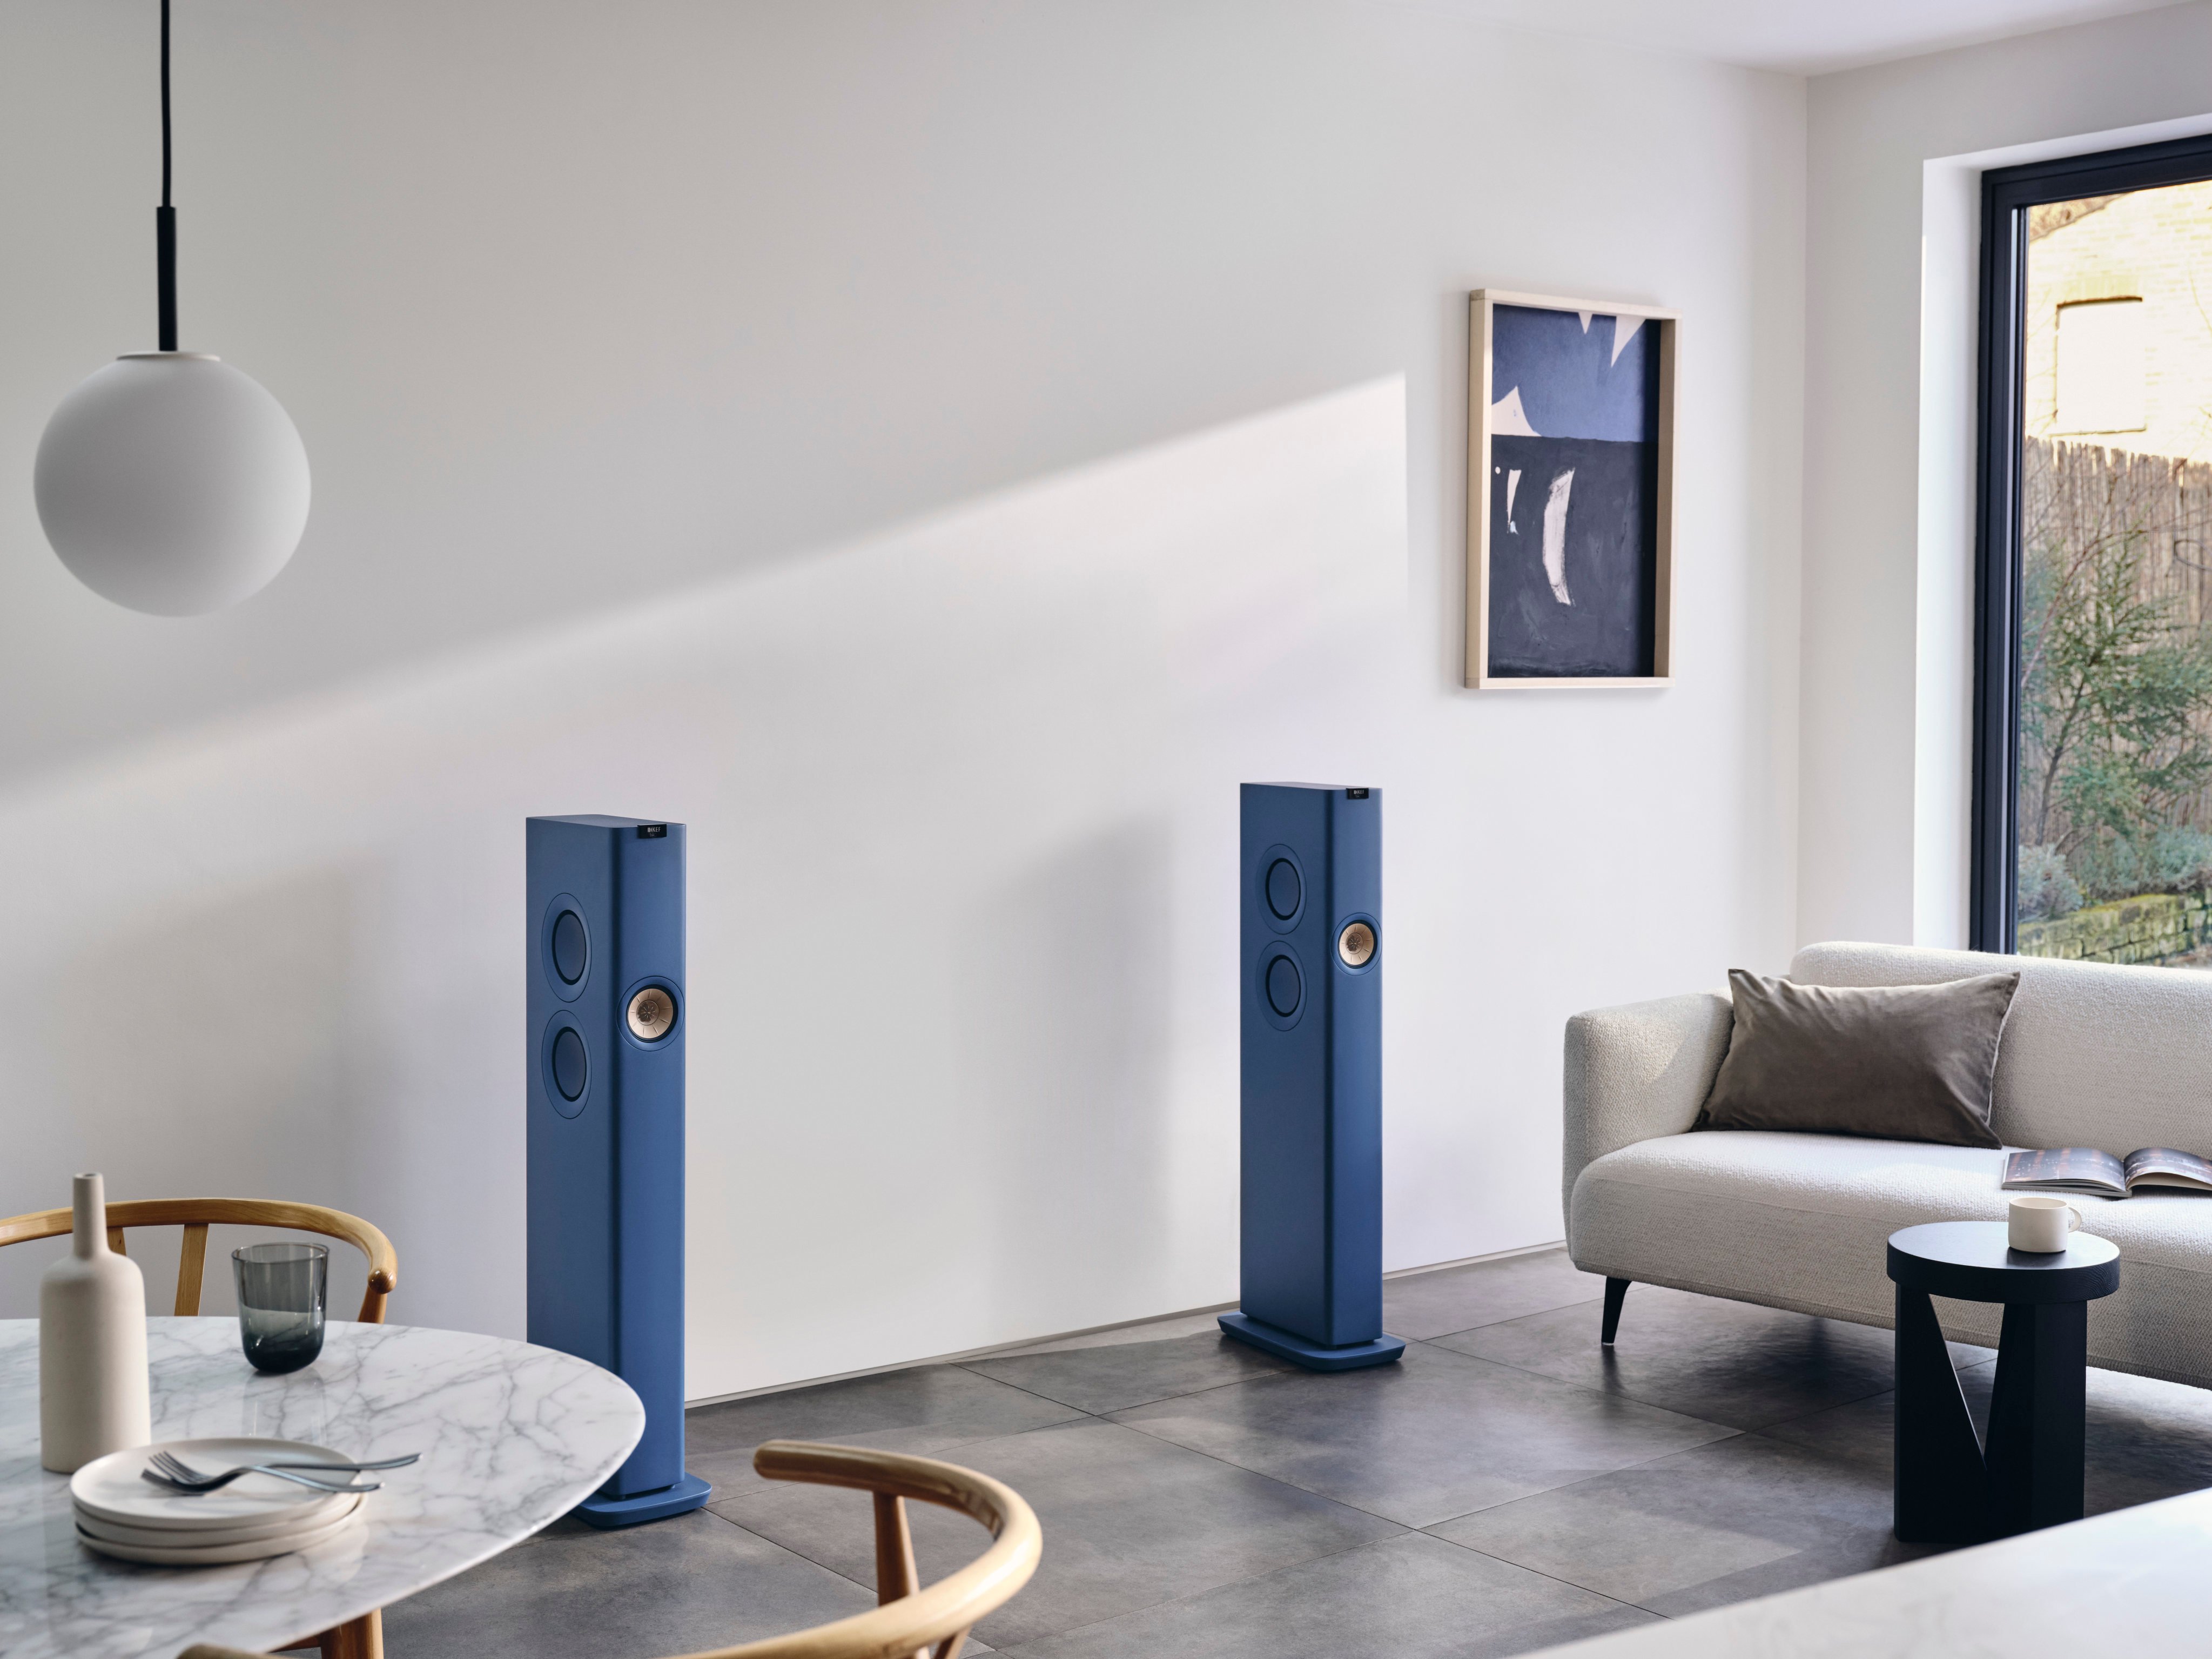 AI and wireless technology are together taking seamless integration and control of smart home platforms, from vacuums and fans to entertainment solutions like these Kef LS60 Wireless Royal Blue speakers. Photos: Handout